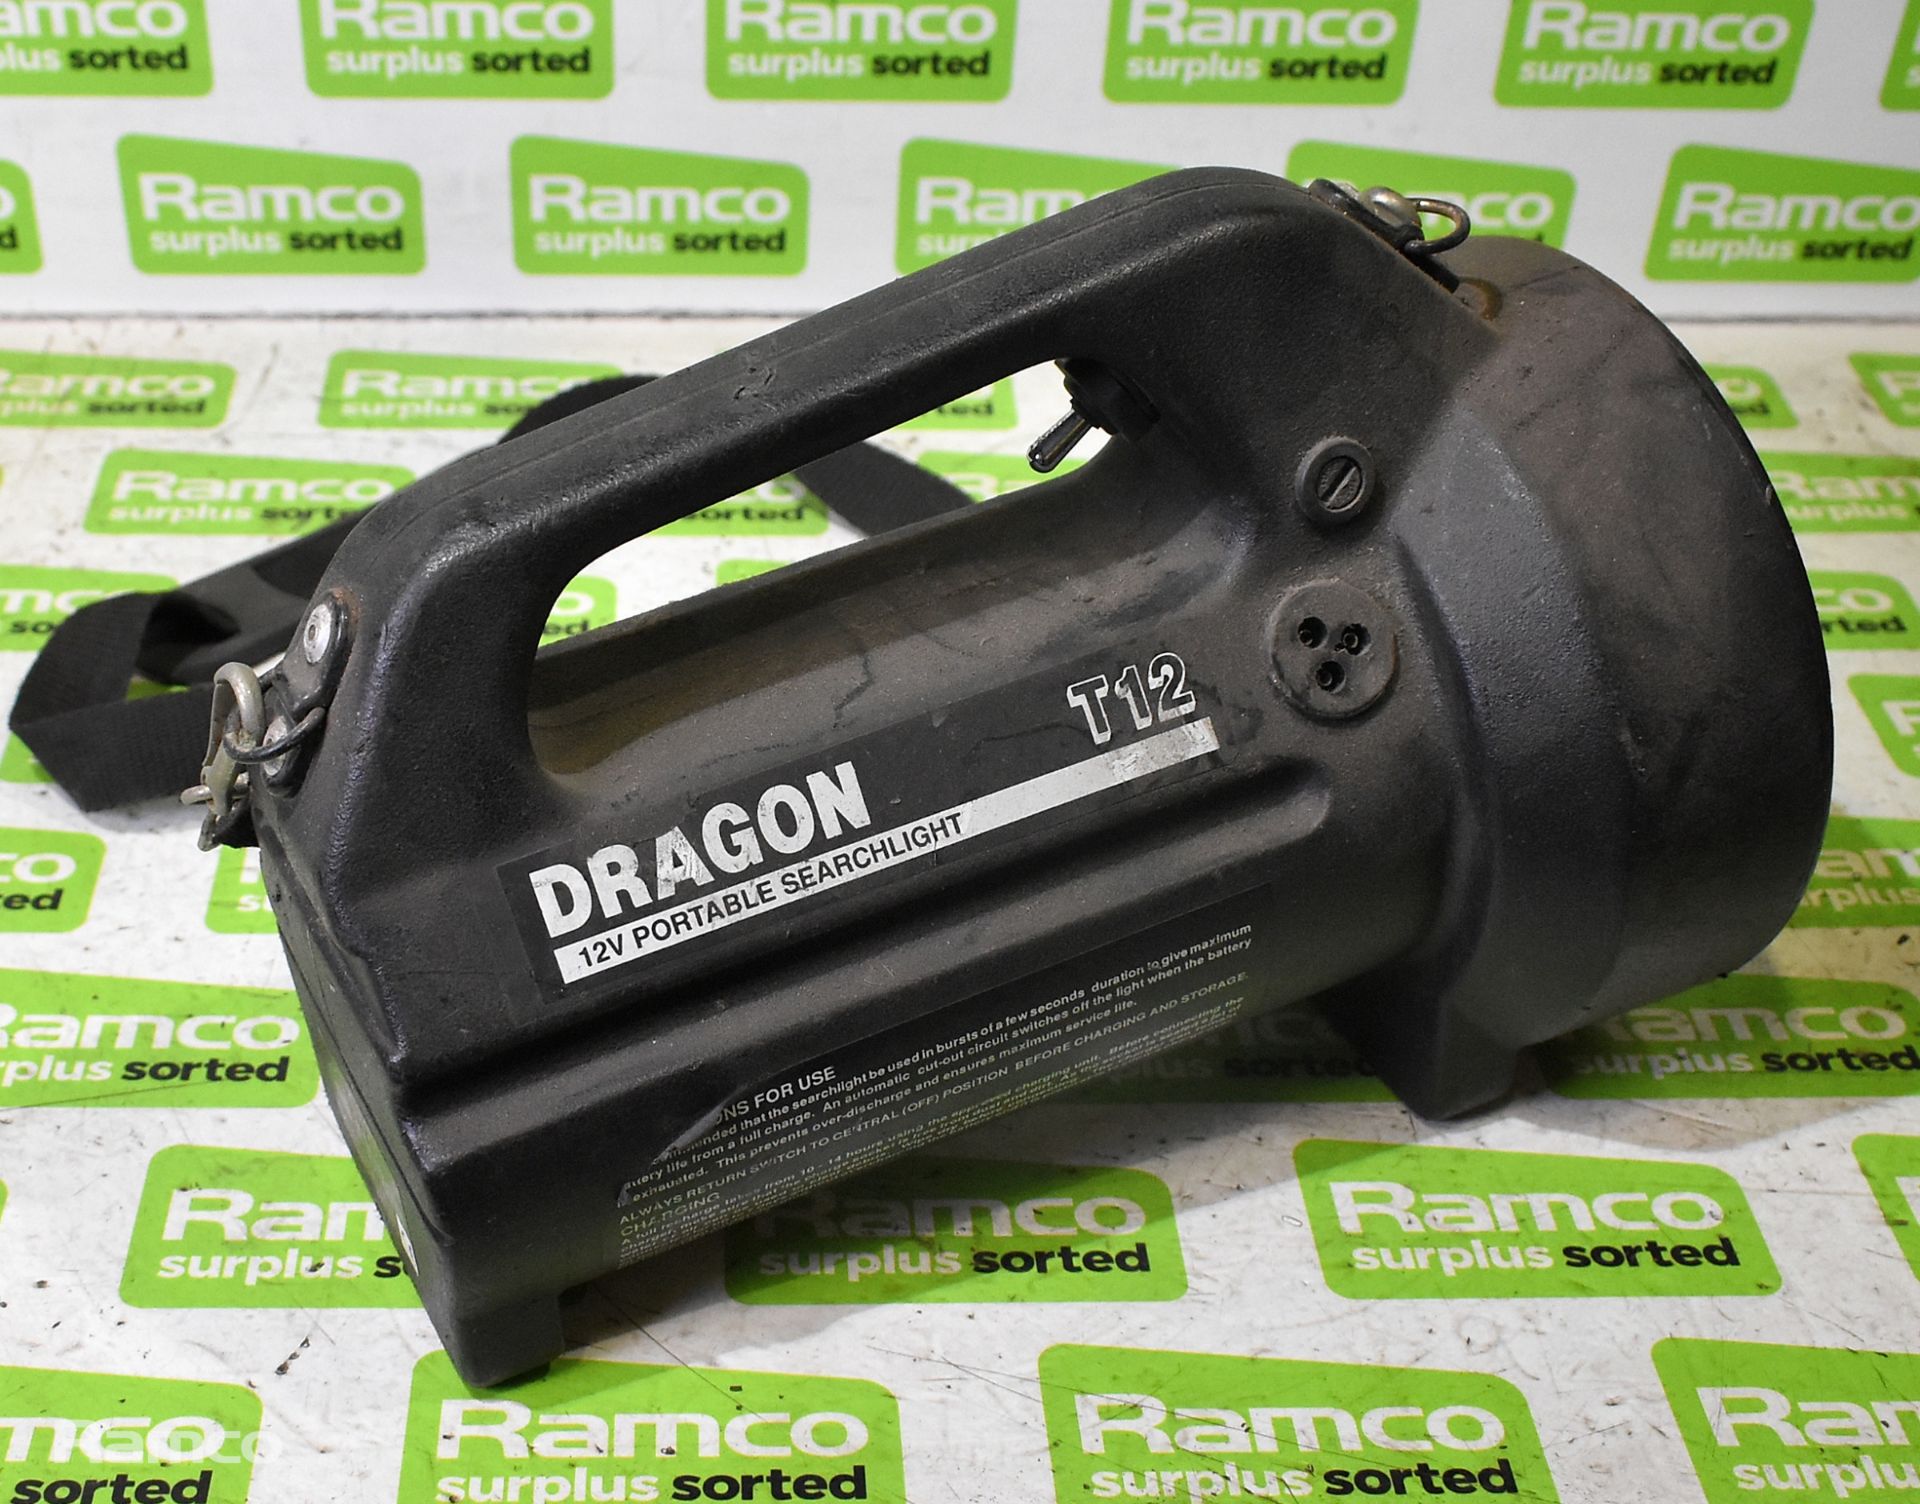 4x Dragon T12 50W portable searchlights, 2x Dragon T12 mains battery chargers - Image 6 of 9